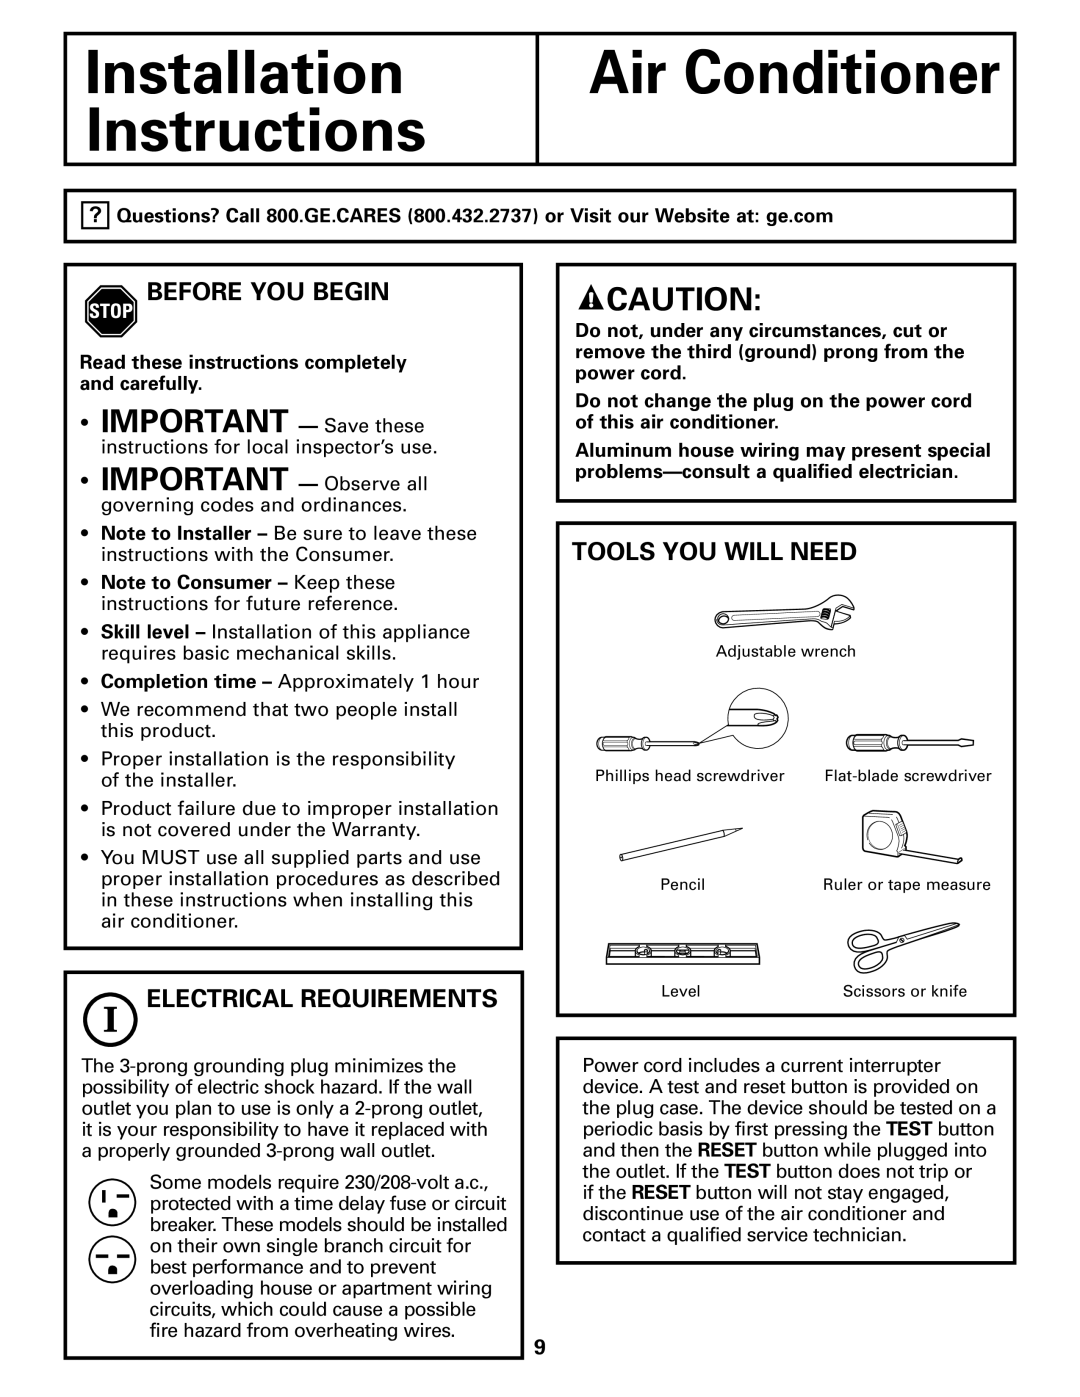 GE AEH25* Installation Instructions, Air Conditioner, IMPORTANT - Save these, Before You Begin, Electrical Requirements 